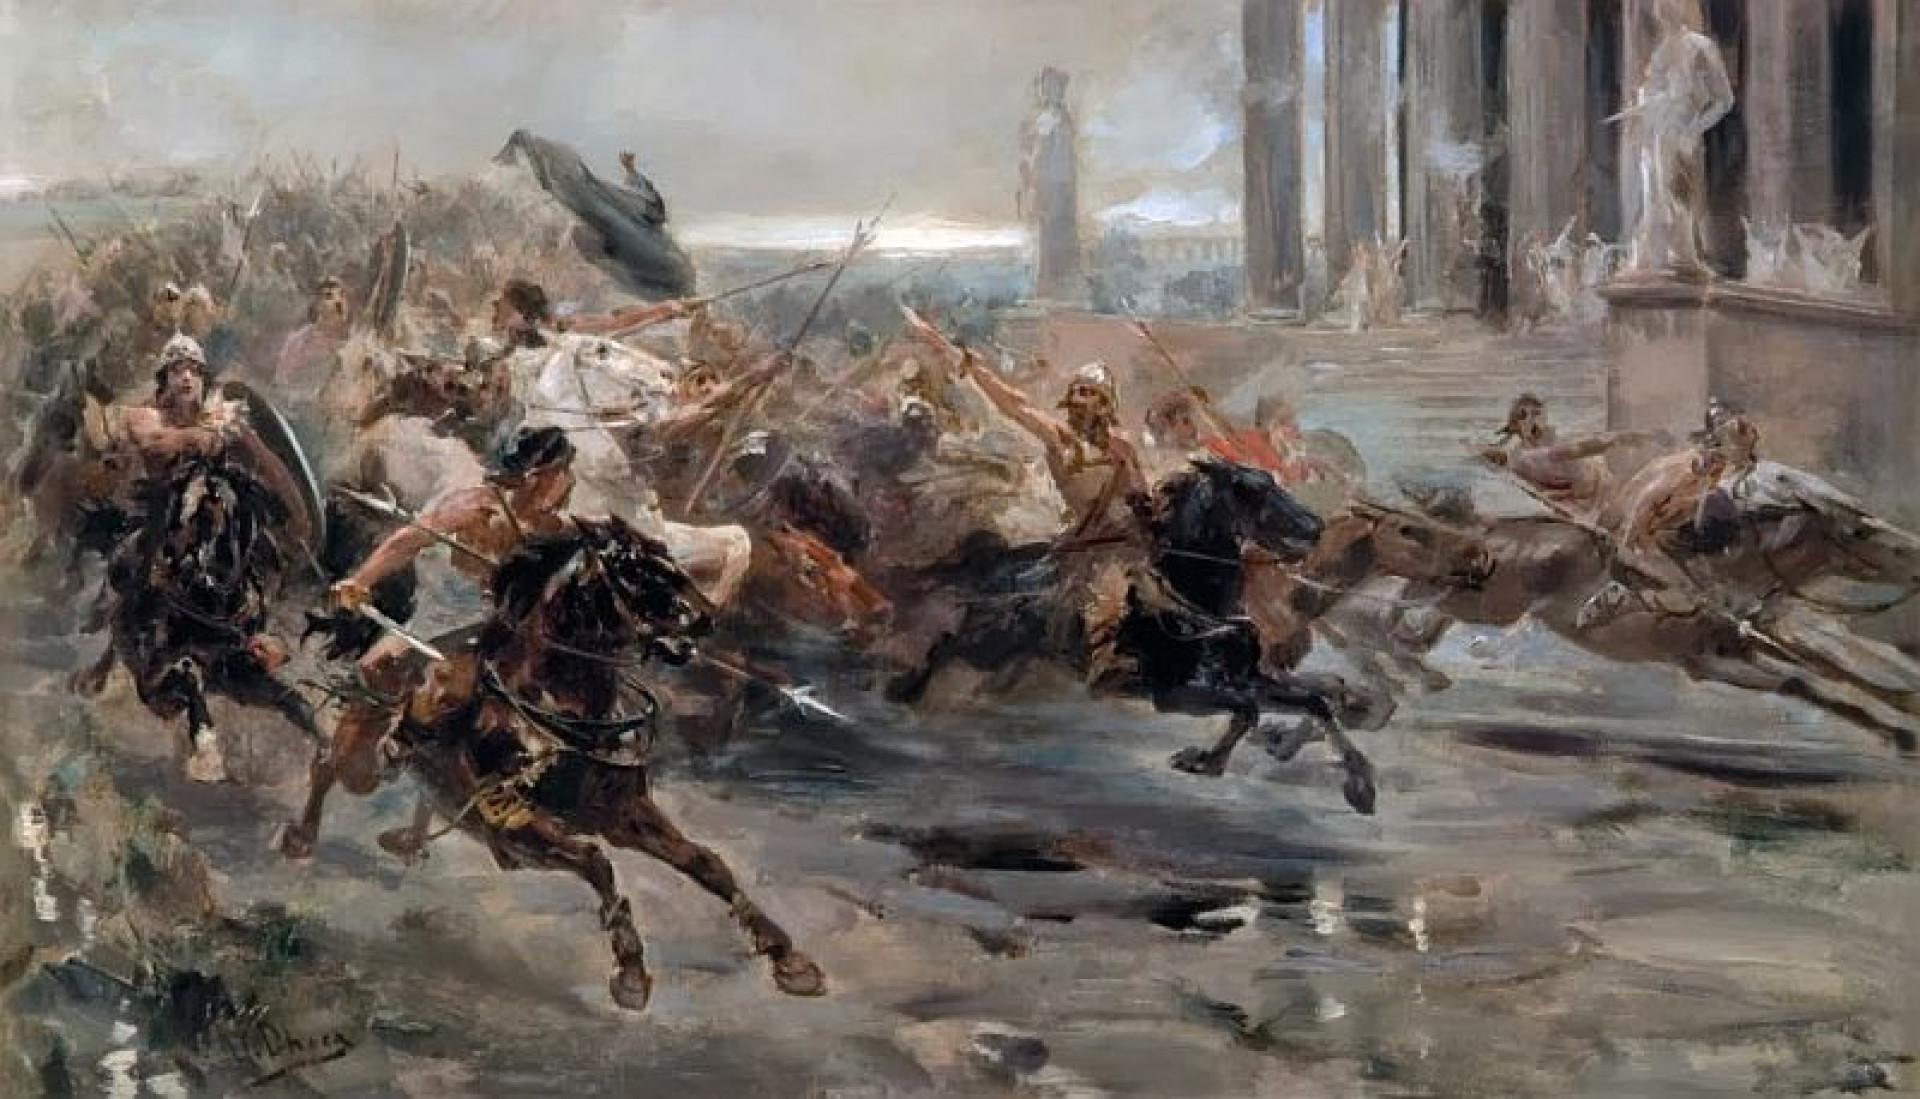 Fall of the Roman Empire in painting: Ulpiano Checa y Sanz, Invasion of the Barbarians or The Huns approaching Rome, In deposit at the University of Valladolid. Disappeared in 1939. Wikimedia Commons (public domain).